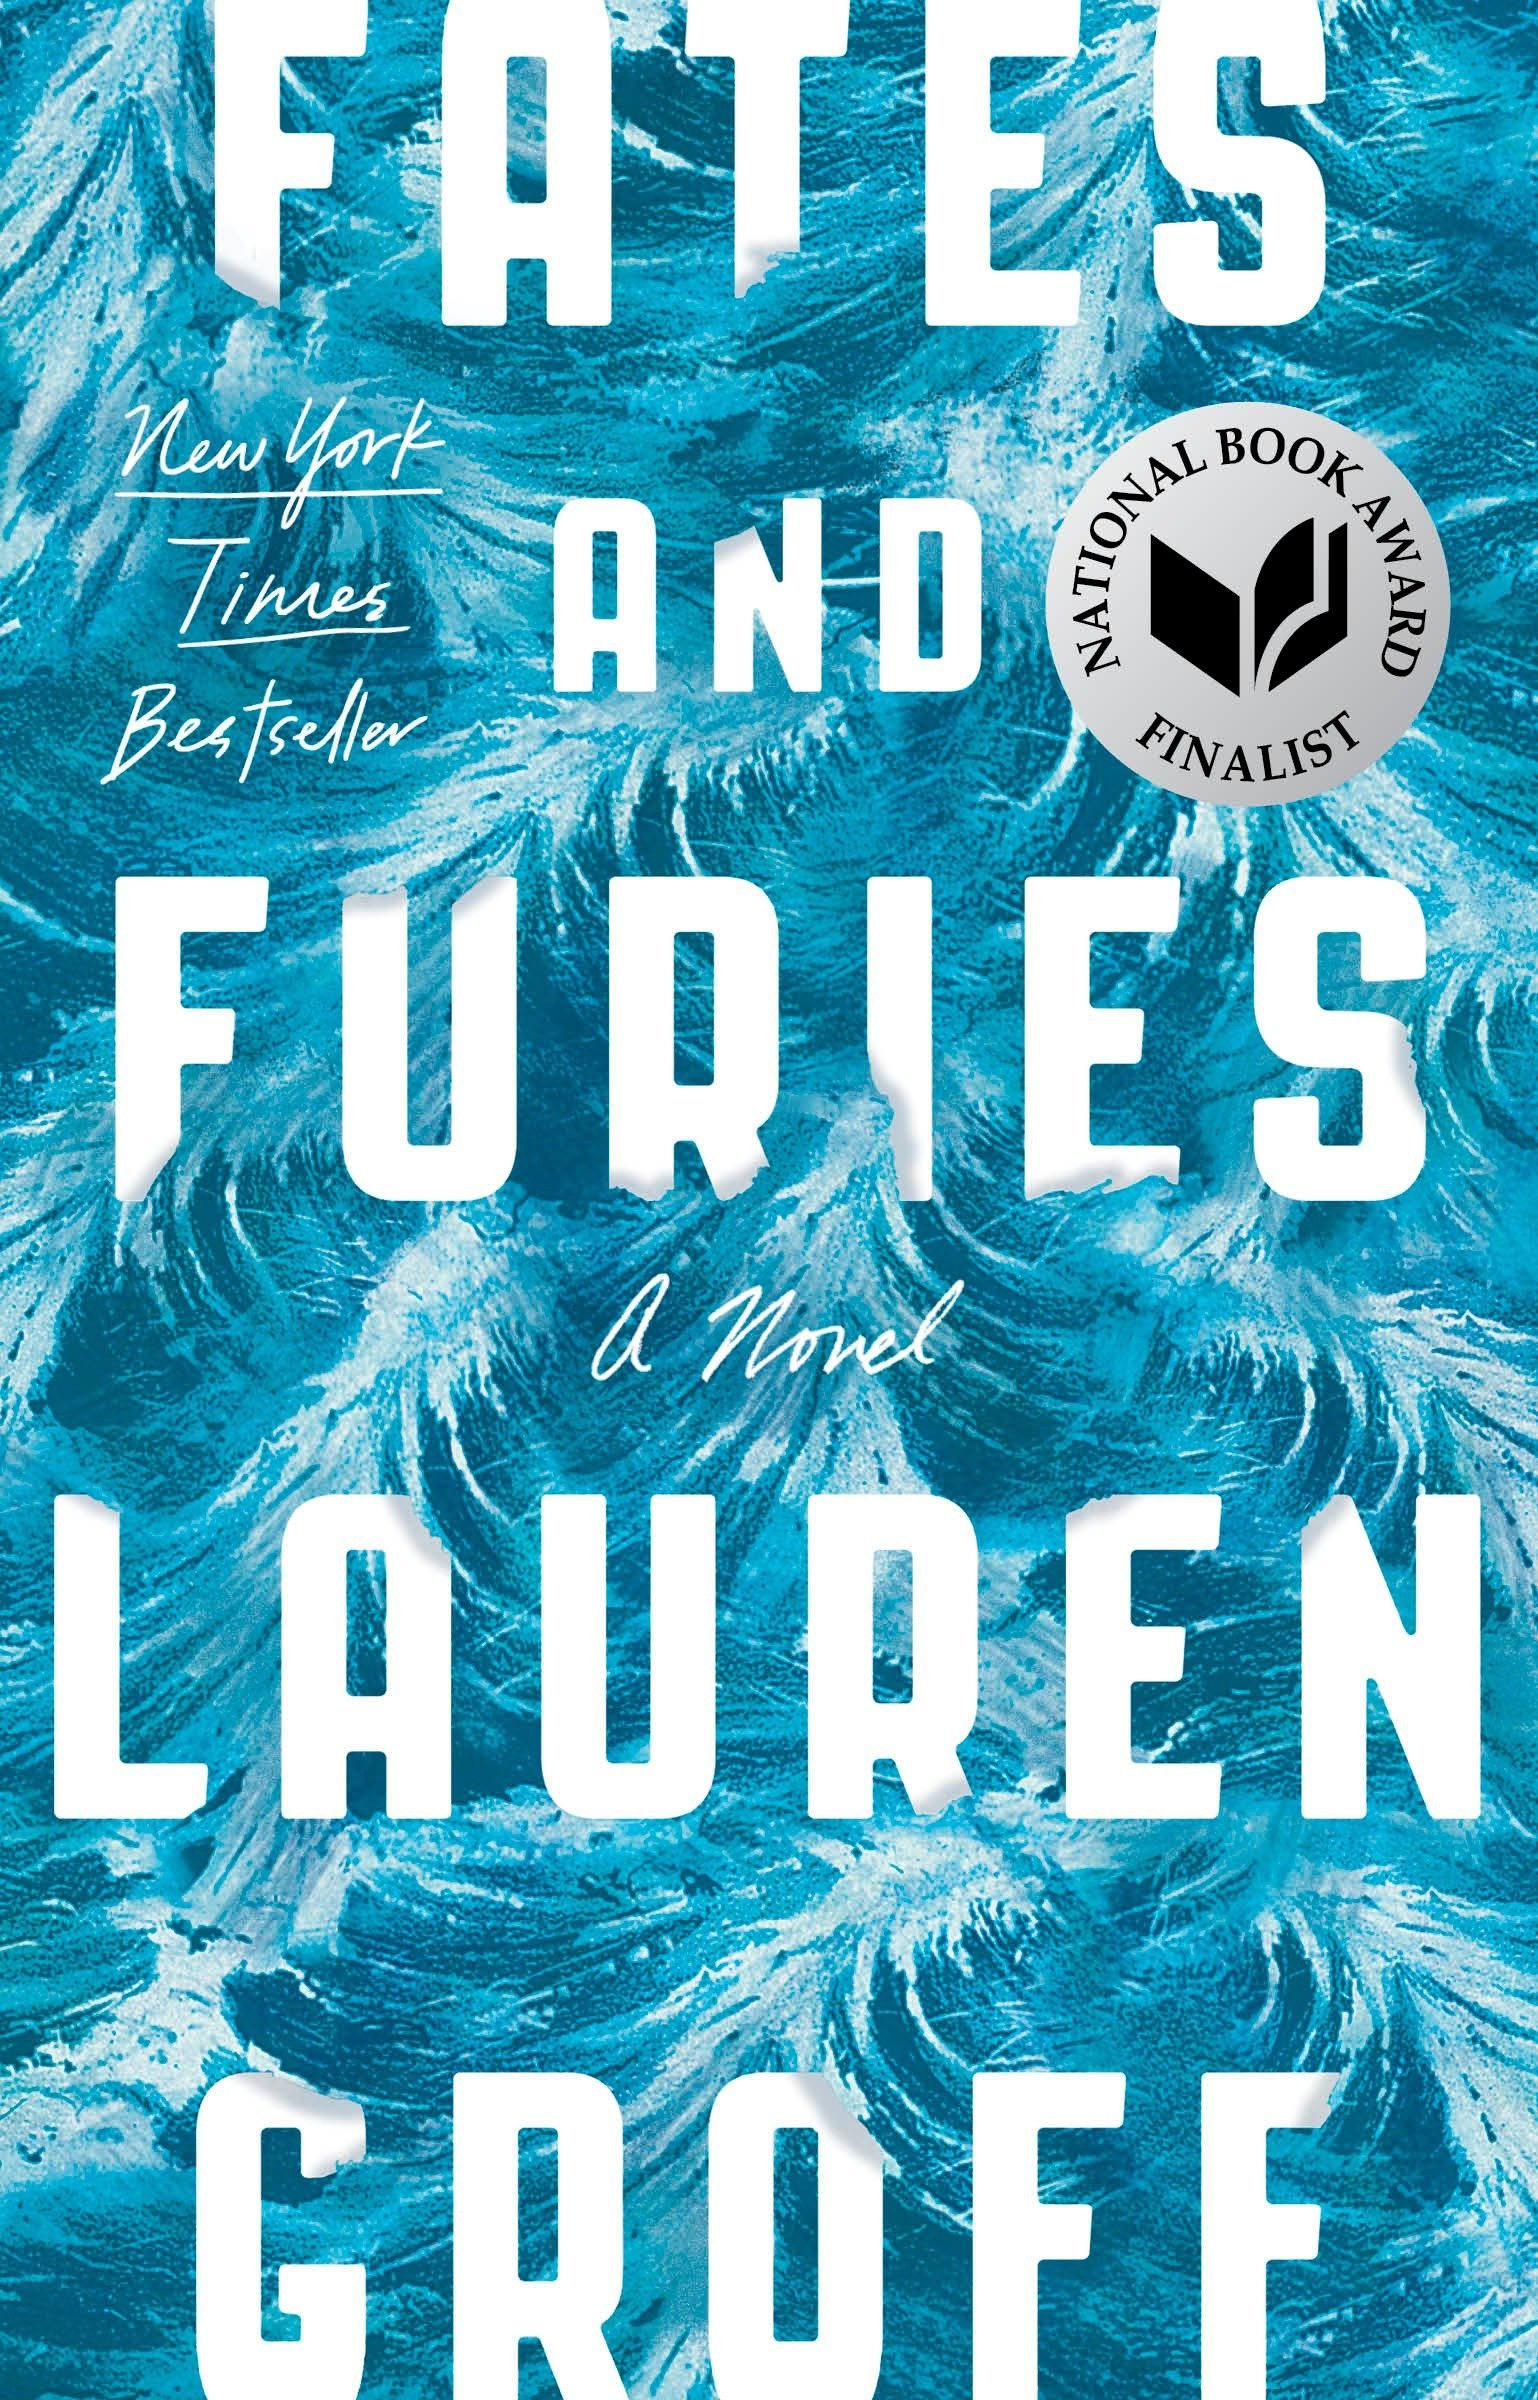  Lauren Groff’s novel Arcadia was sweeping and beautiful. Her stories are unputdownable. But this is my favorite of hers.  